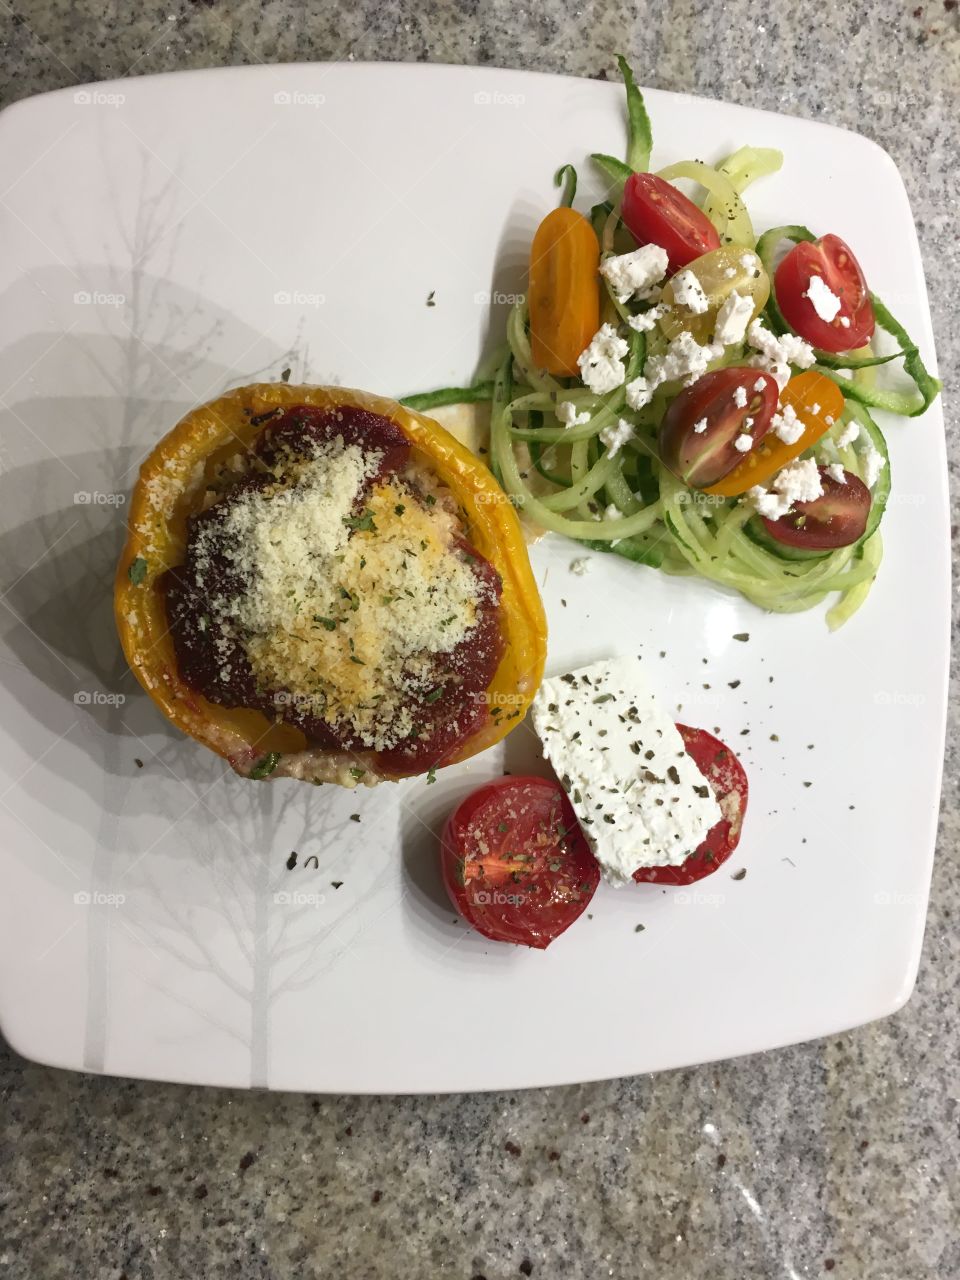 Stuffed Peppers and Cucumber Salad